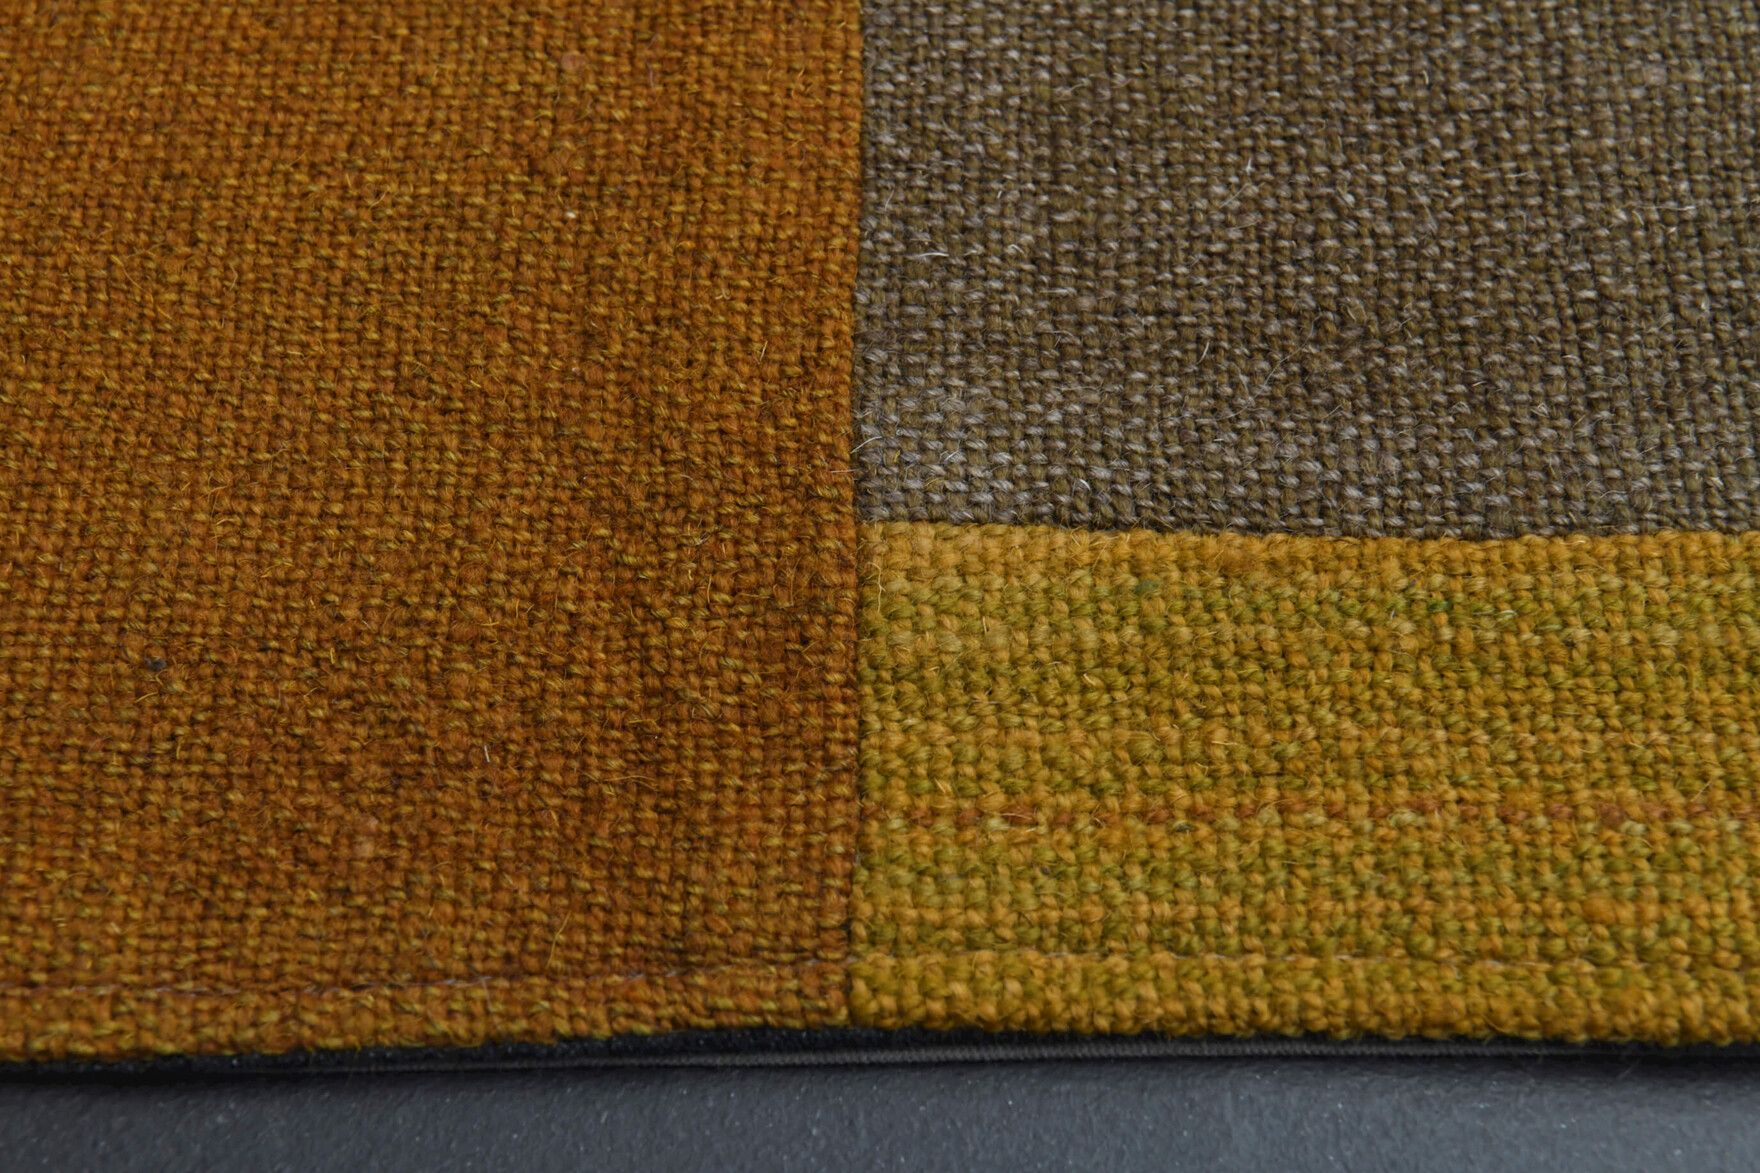 Yellow Carpet Overdyed Rug Muted Rug Rug for Livingroom 